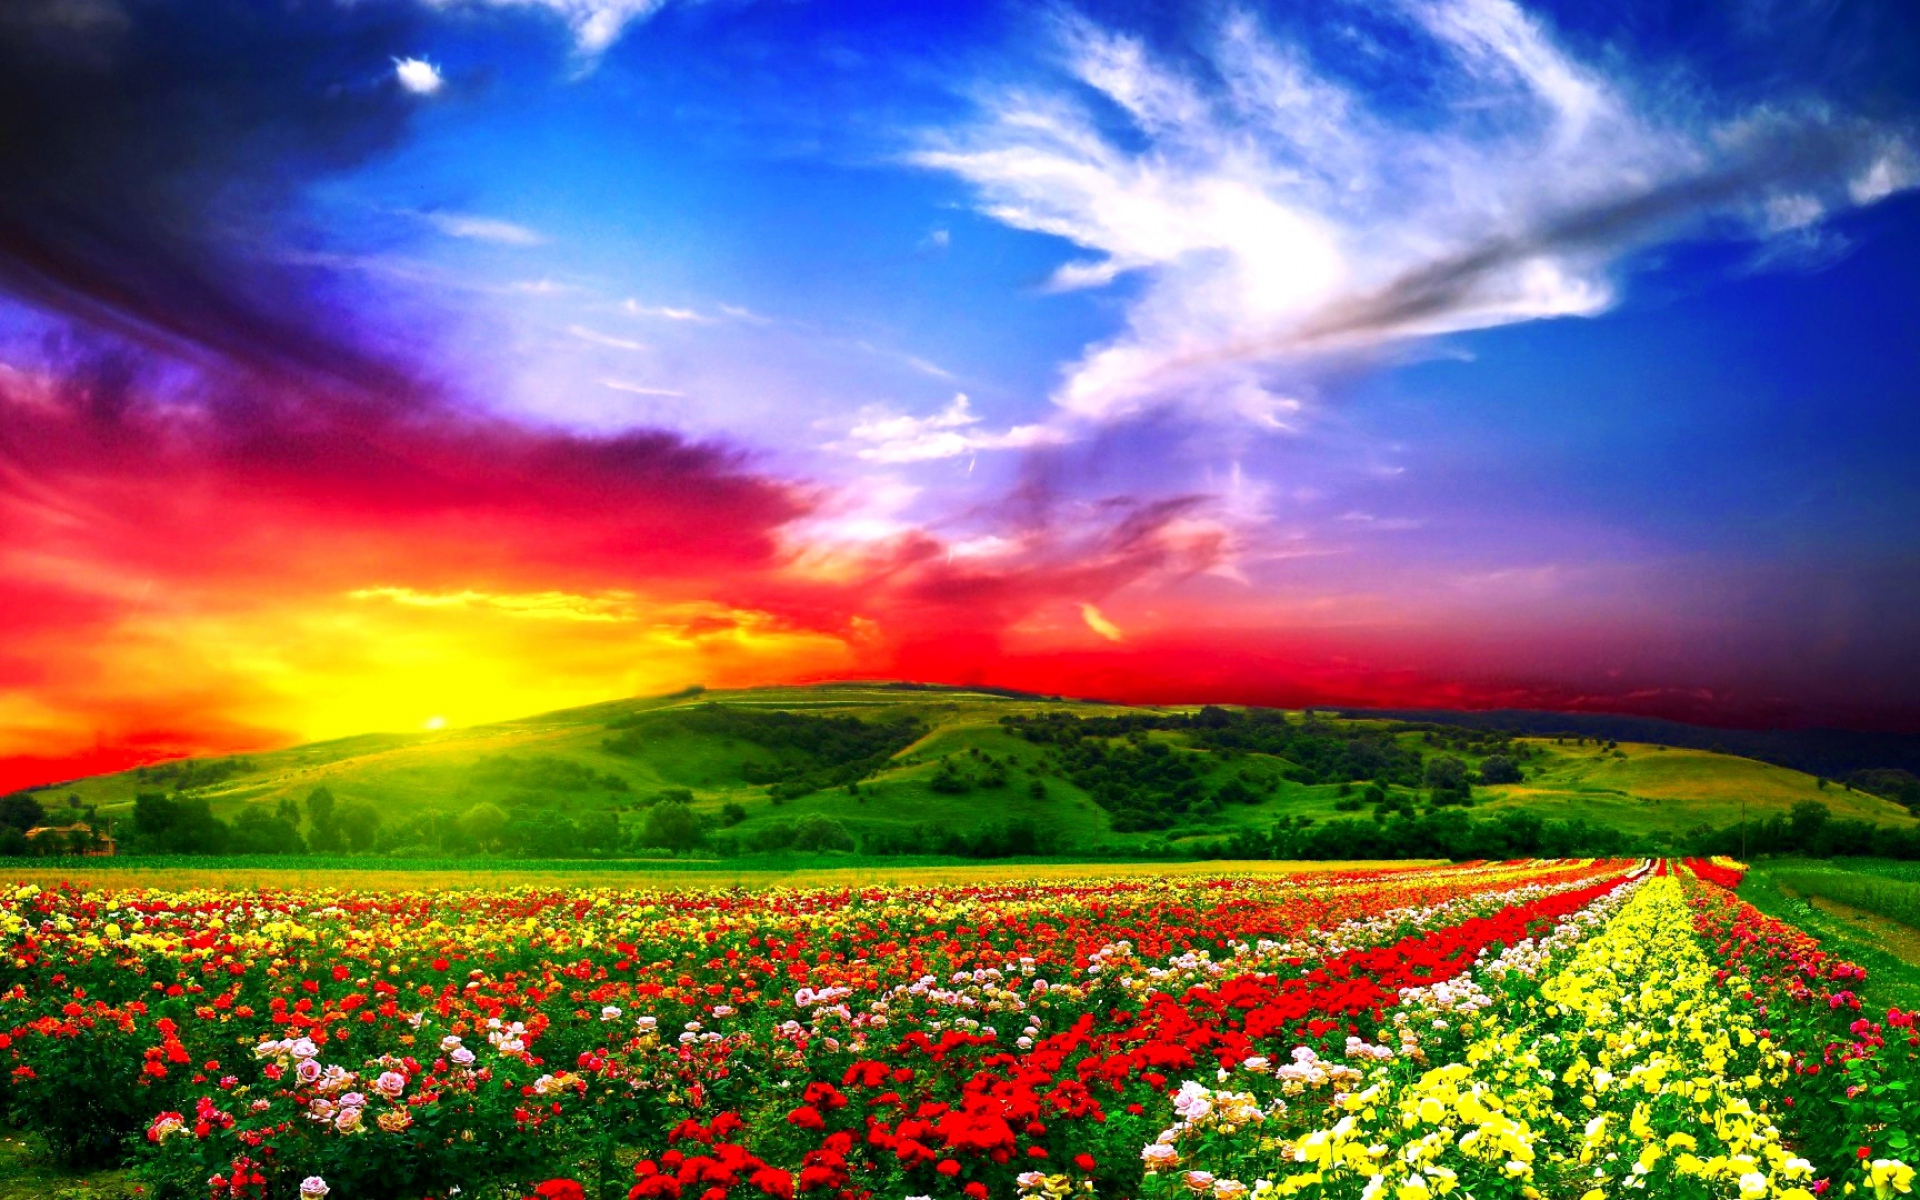 flower field wallpaper,natural landscape,sky,people in nature,nature,field